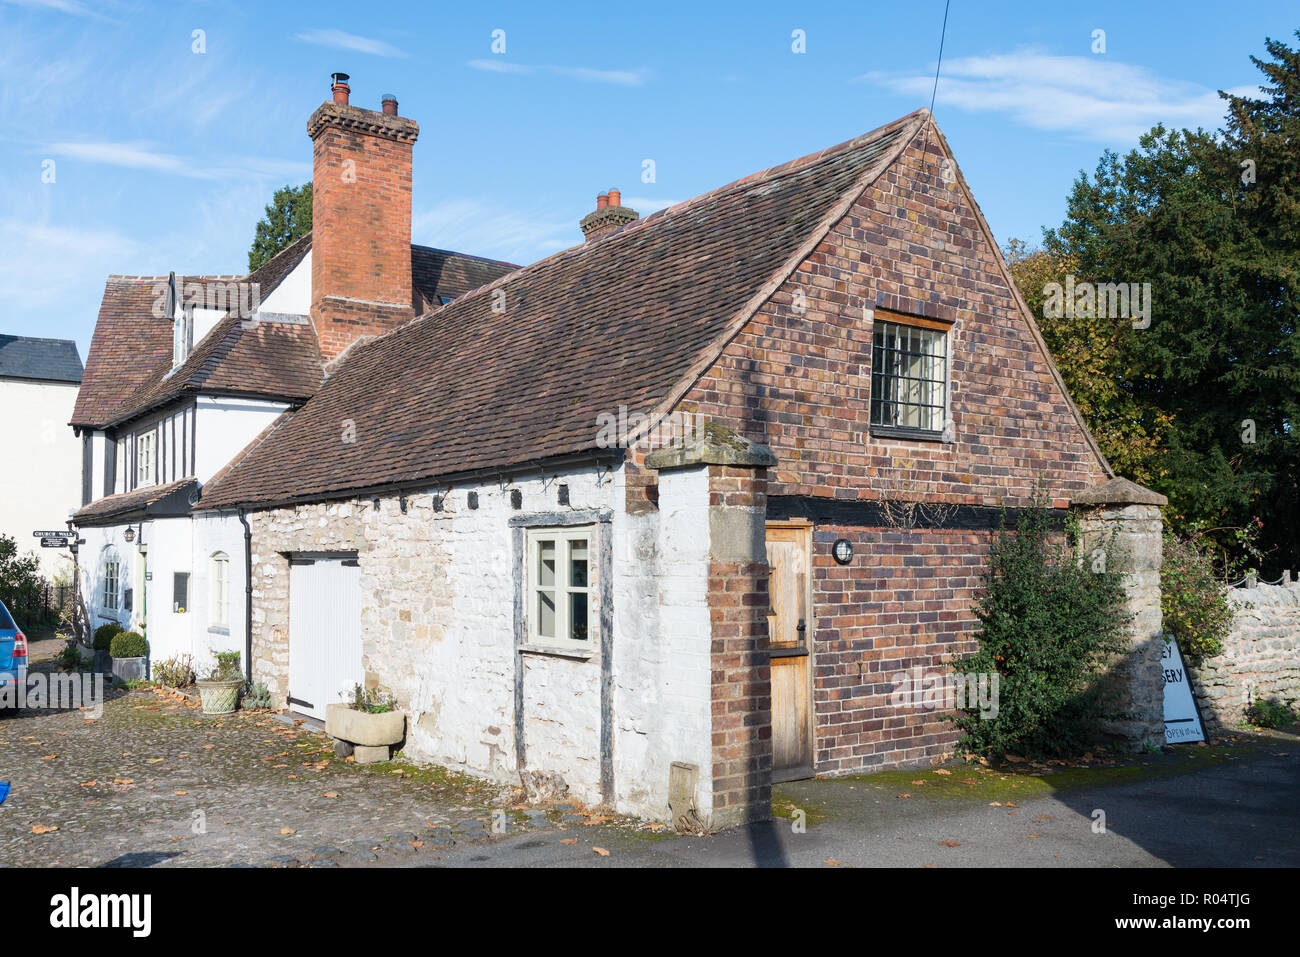 Old half timber-framed house with attached brick garage and storeroom in Much Wenlock, Shropshire Stock Photo